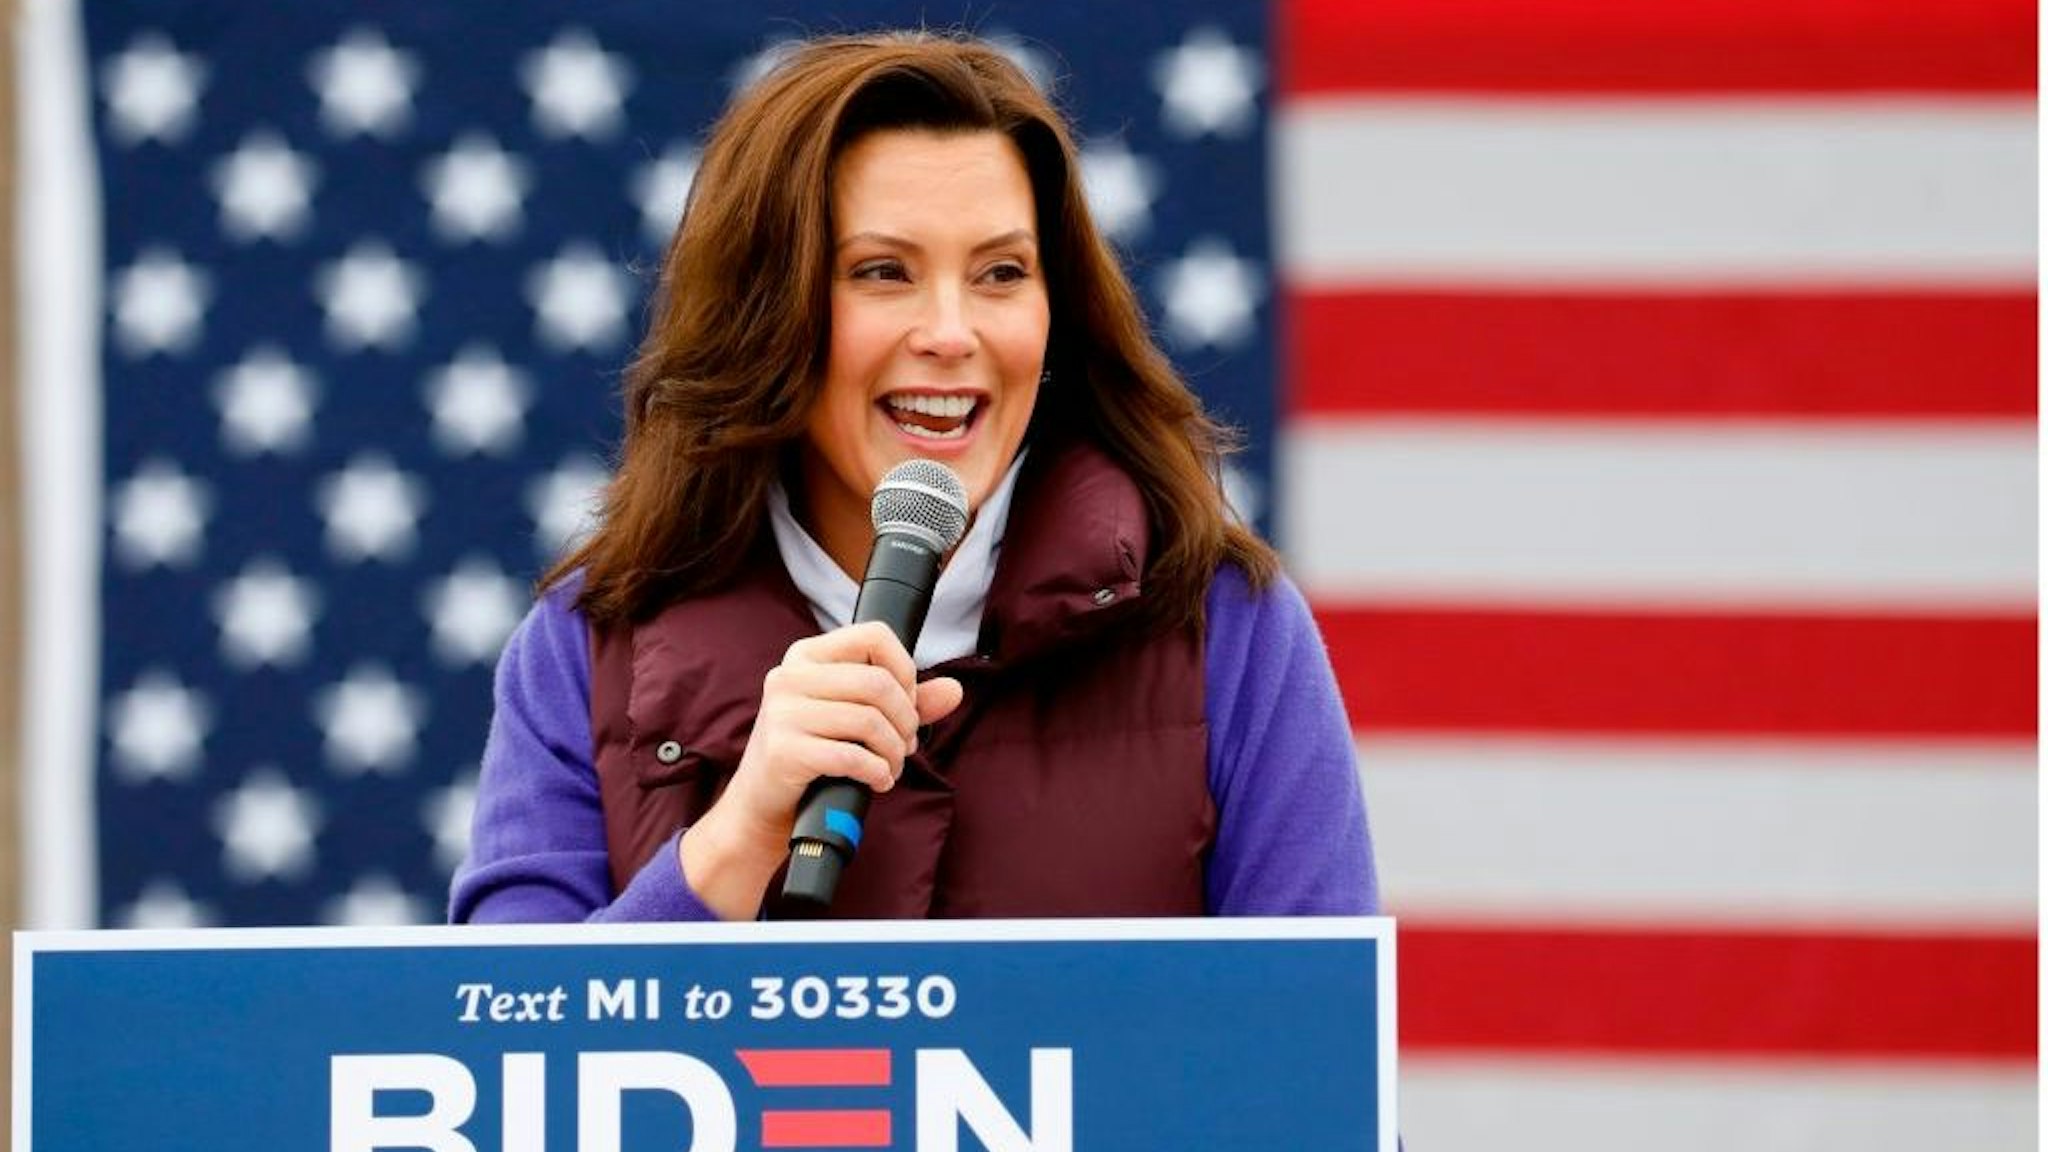 Michigan Governor Gretchen Whitmer talks with people as Democratic vice presidential nominee Senator Kamala Harris (D-CA) takes part in a campaign stop at IBEW Local 58 on October 25, 2020 in Detroit, Michigan. - As she speaks to cheering crowds, drops in to neighborhood coffee shops or pays "surprise" visits to college students, 56-year-old Kamala Harris has brought a jolt of youthful energy to the low-key presidential campaign of her 77-year-old running mate, Democrat Joe Biden. (Photo by JEFF KOWALSKY / AFP) (Photo by JEFF KOWALSKY/AFP via Getty Images)